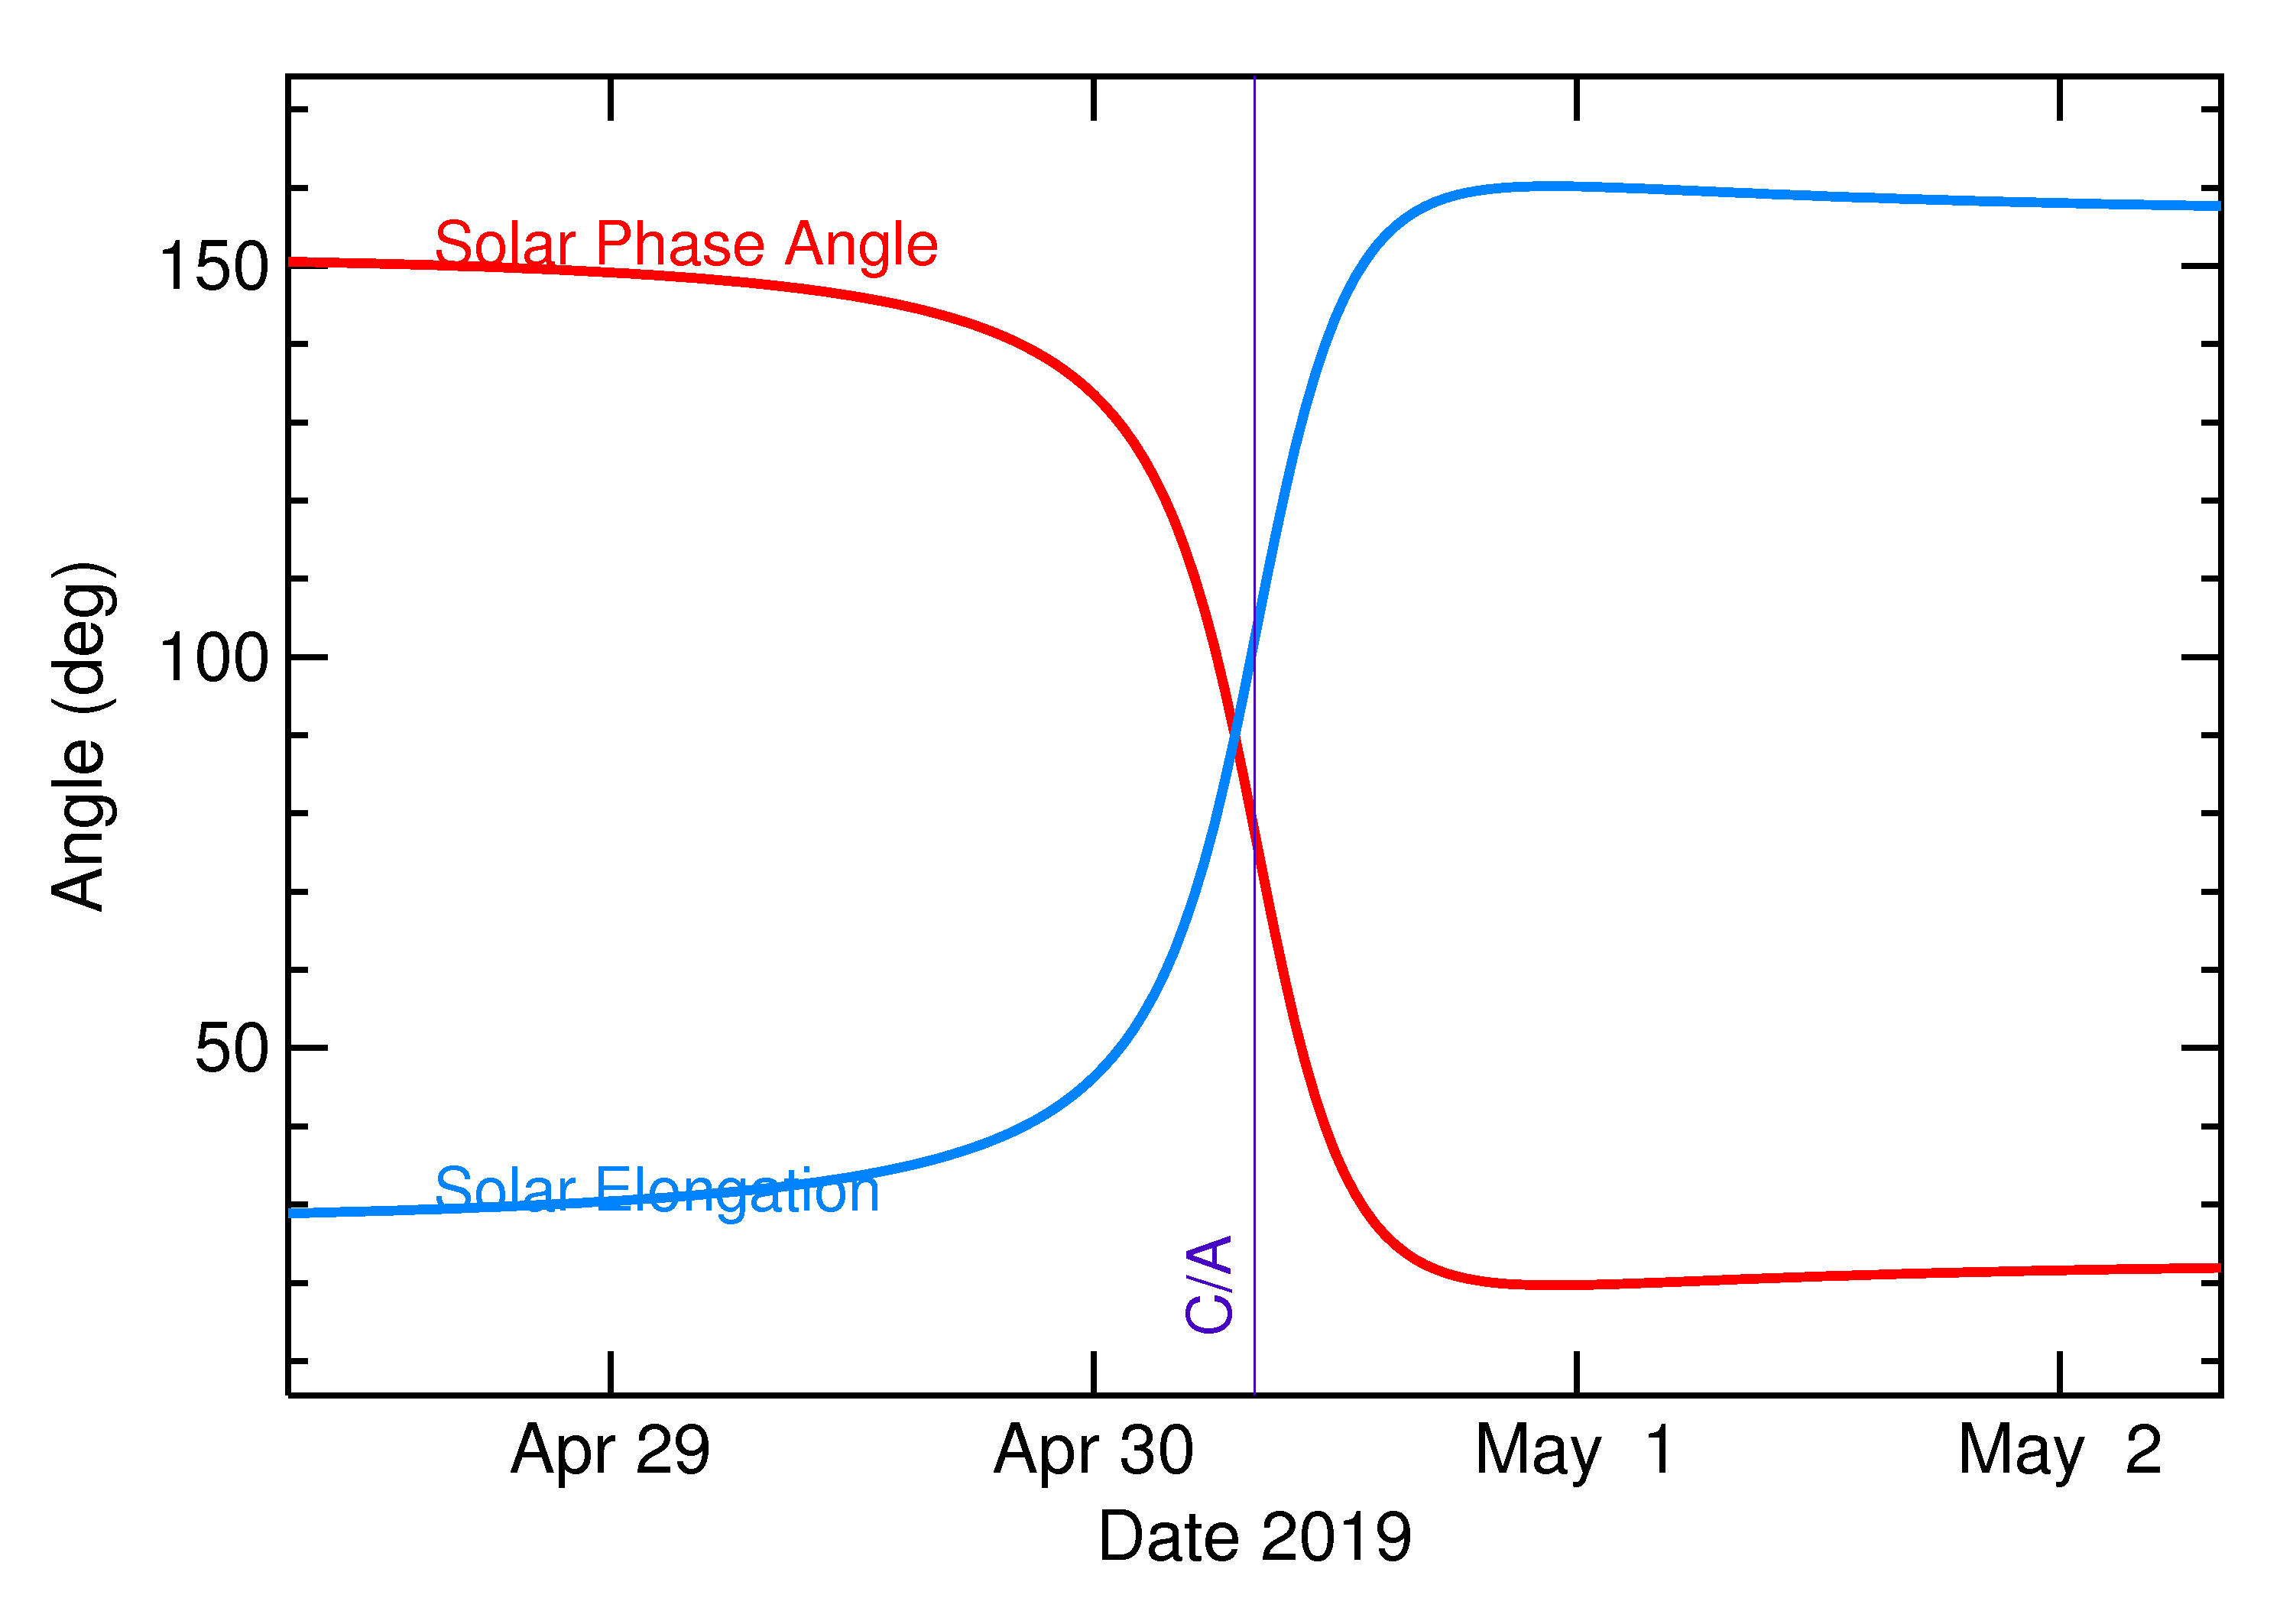 Solar Elongation and Solar Phase Angle of 2019 JK in the days around closest approach